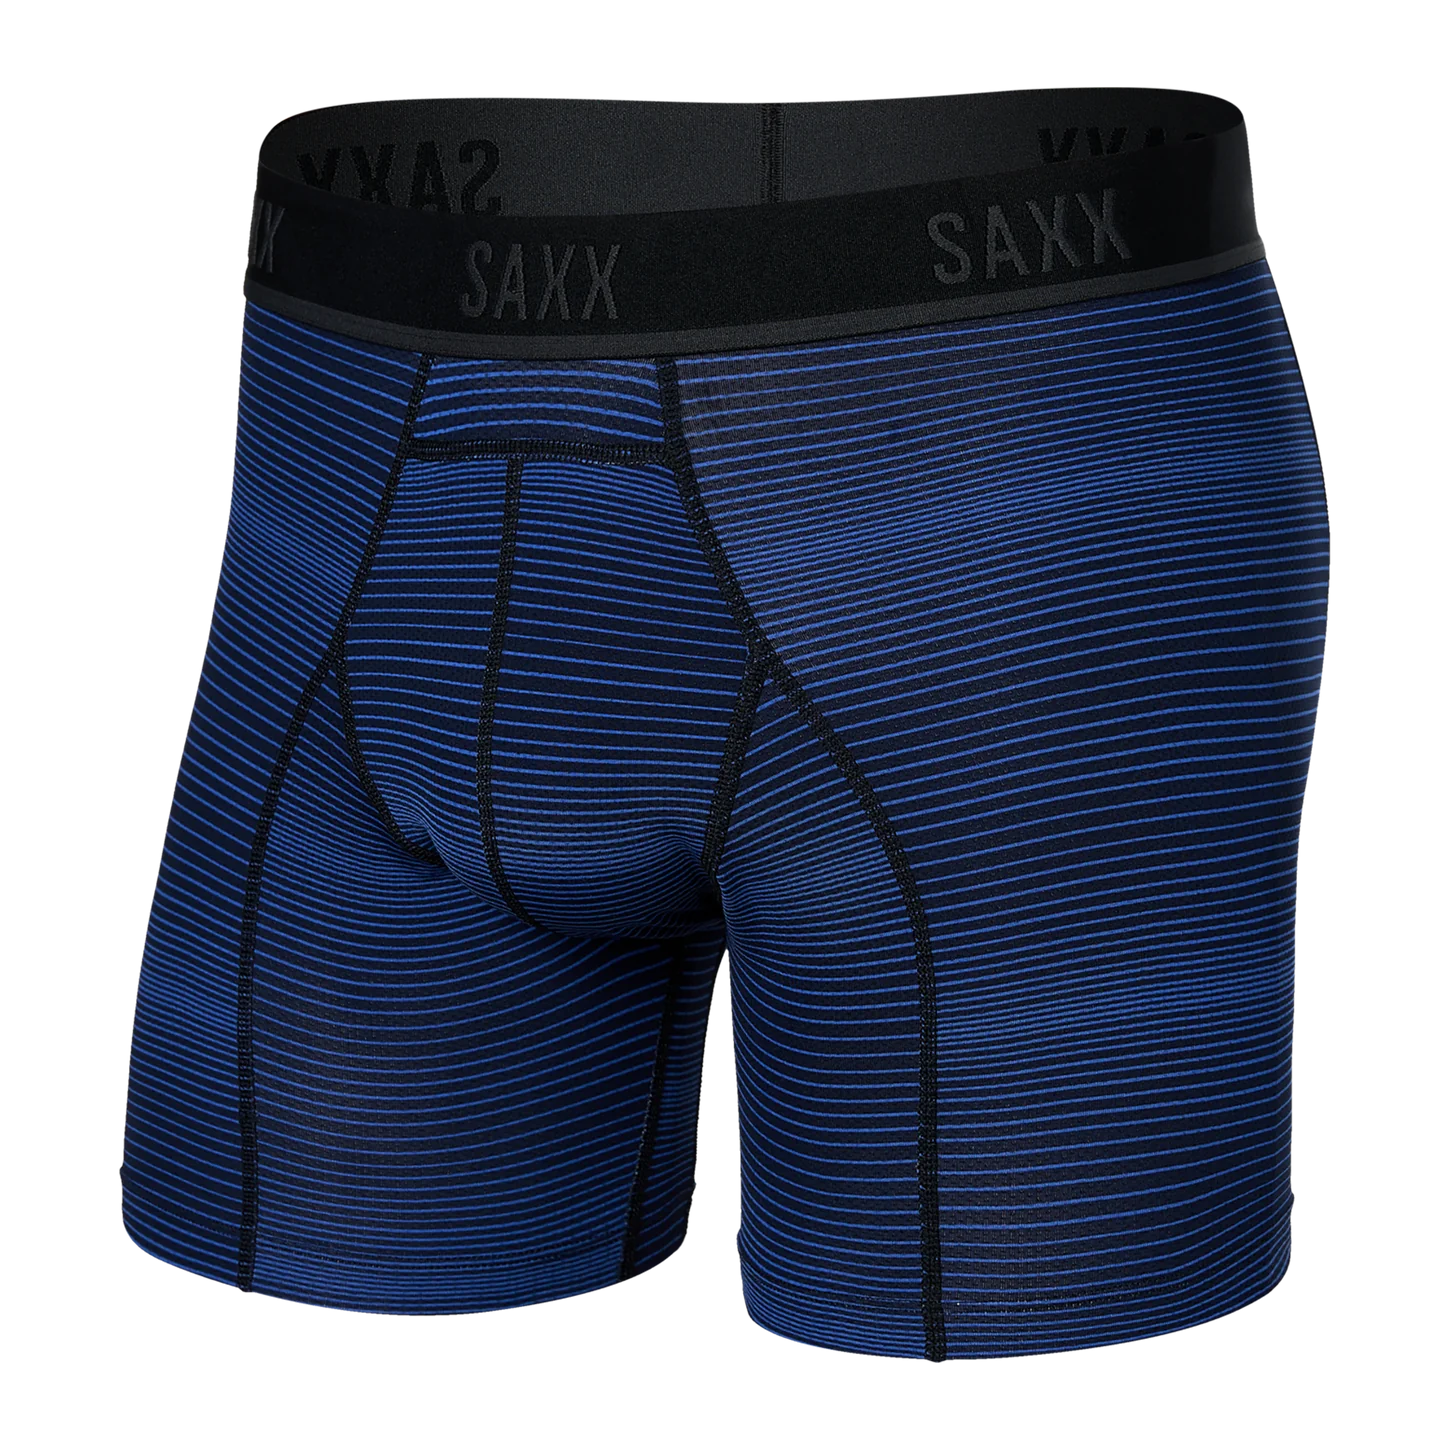 SAXX Kinetic Boxer Brief - Beyond The Usual